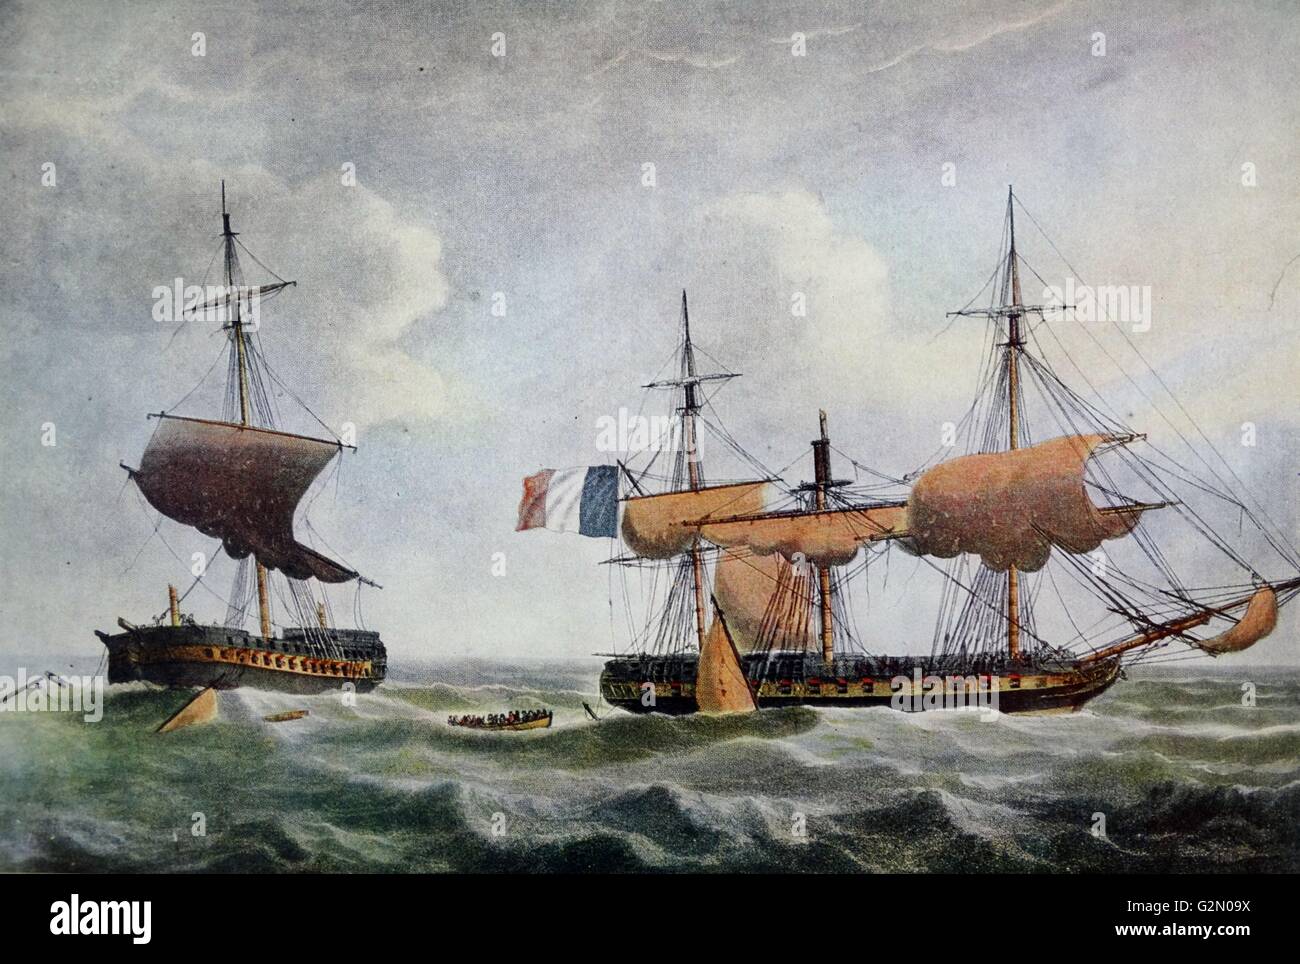 La piemontaise, capturing the warren Hastings 1805. The Piémontaise was frigate of the French Navy. She served as a commerce raider in the Indian Ocean. On 21 June 1806, during the Anglo-French wars against Napoleon, she captured the East Indiaman Warren Hasting. Stock Photo